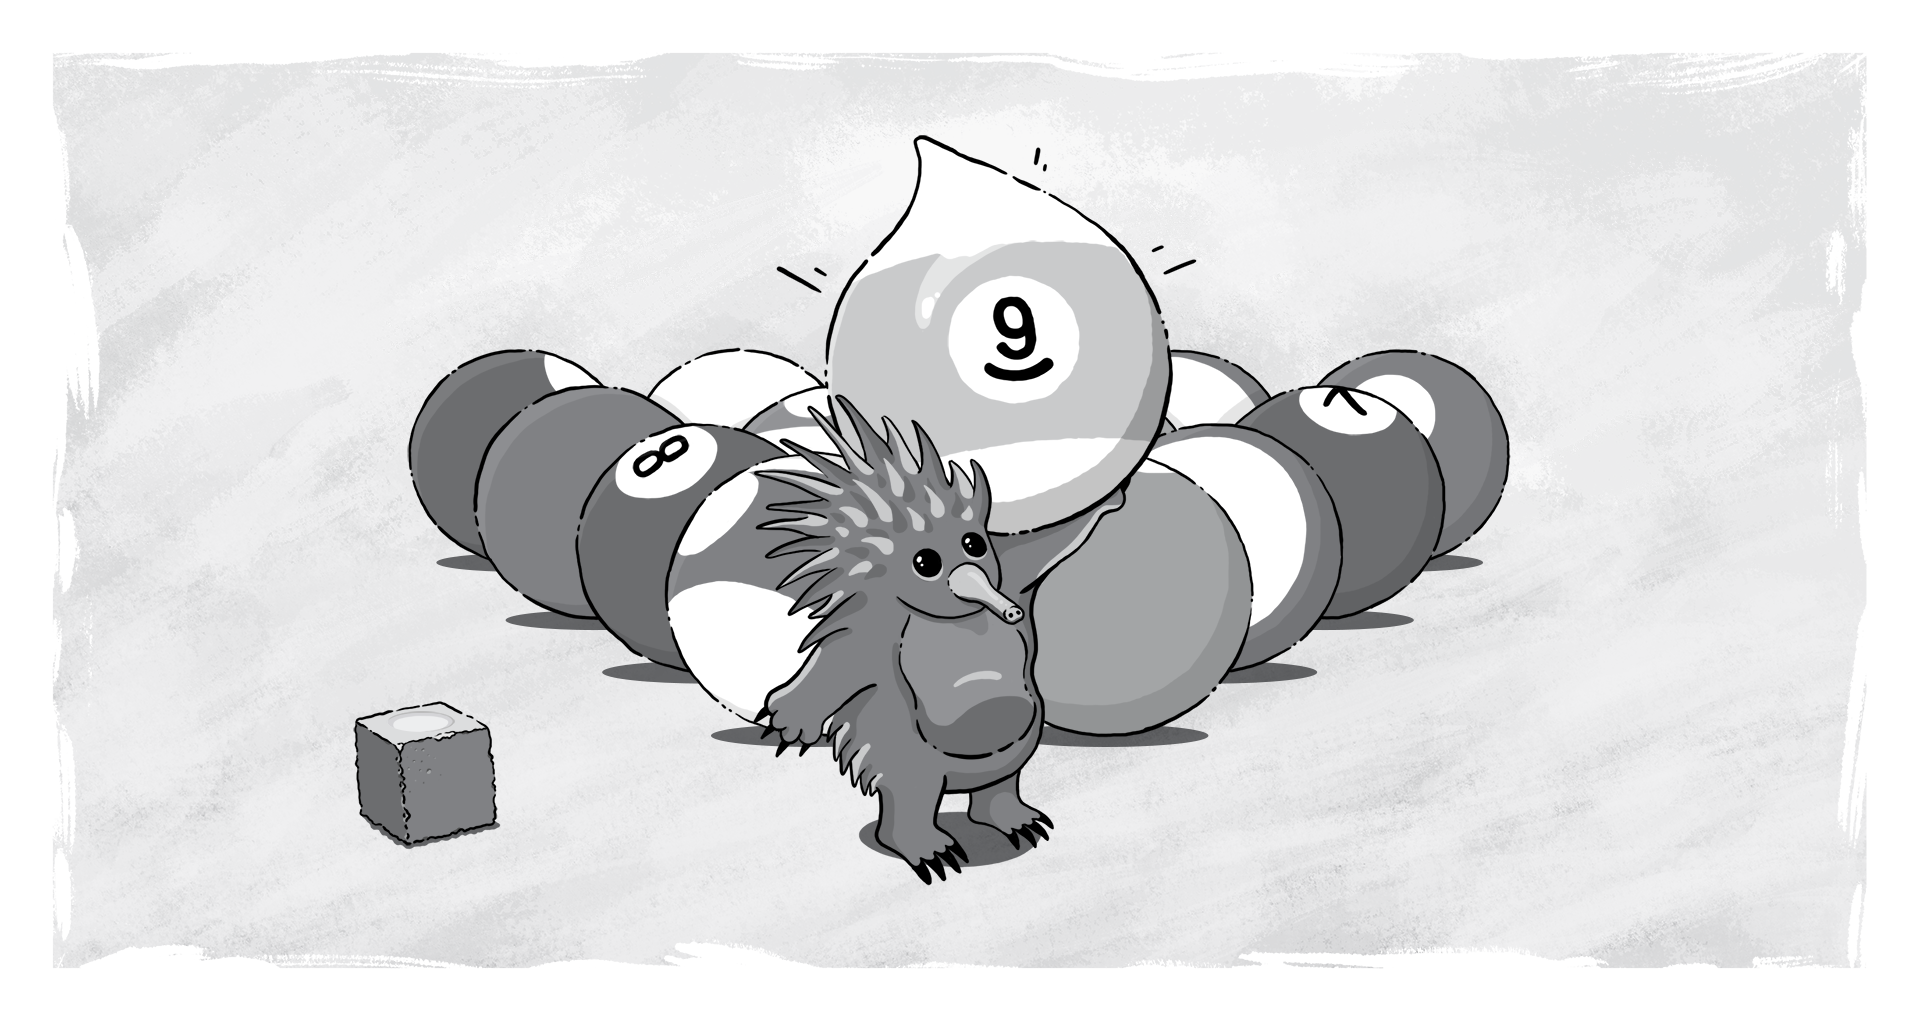 Drupal 9 pool game with Echidna